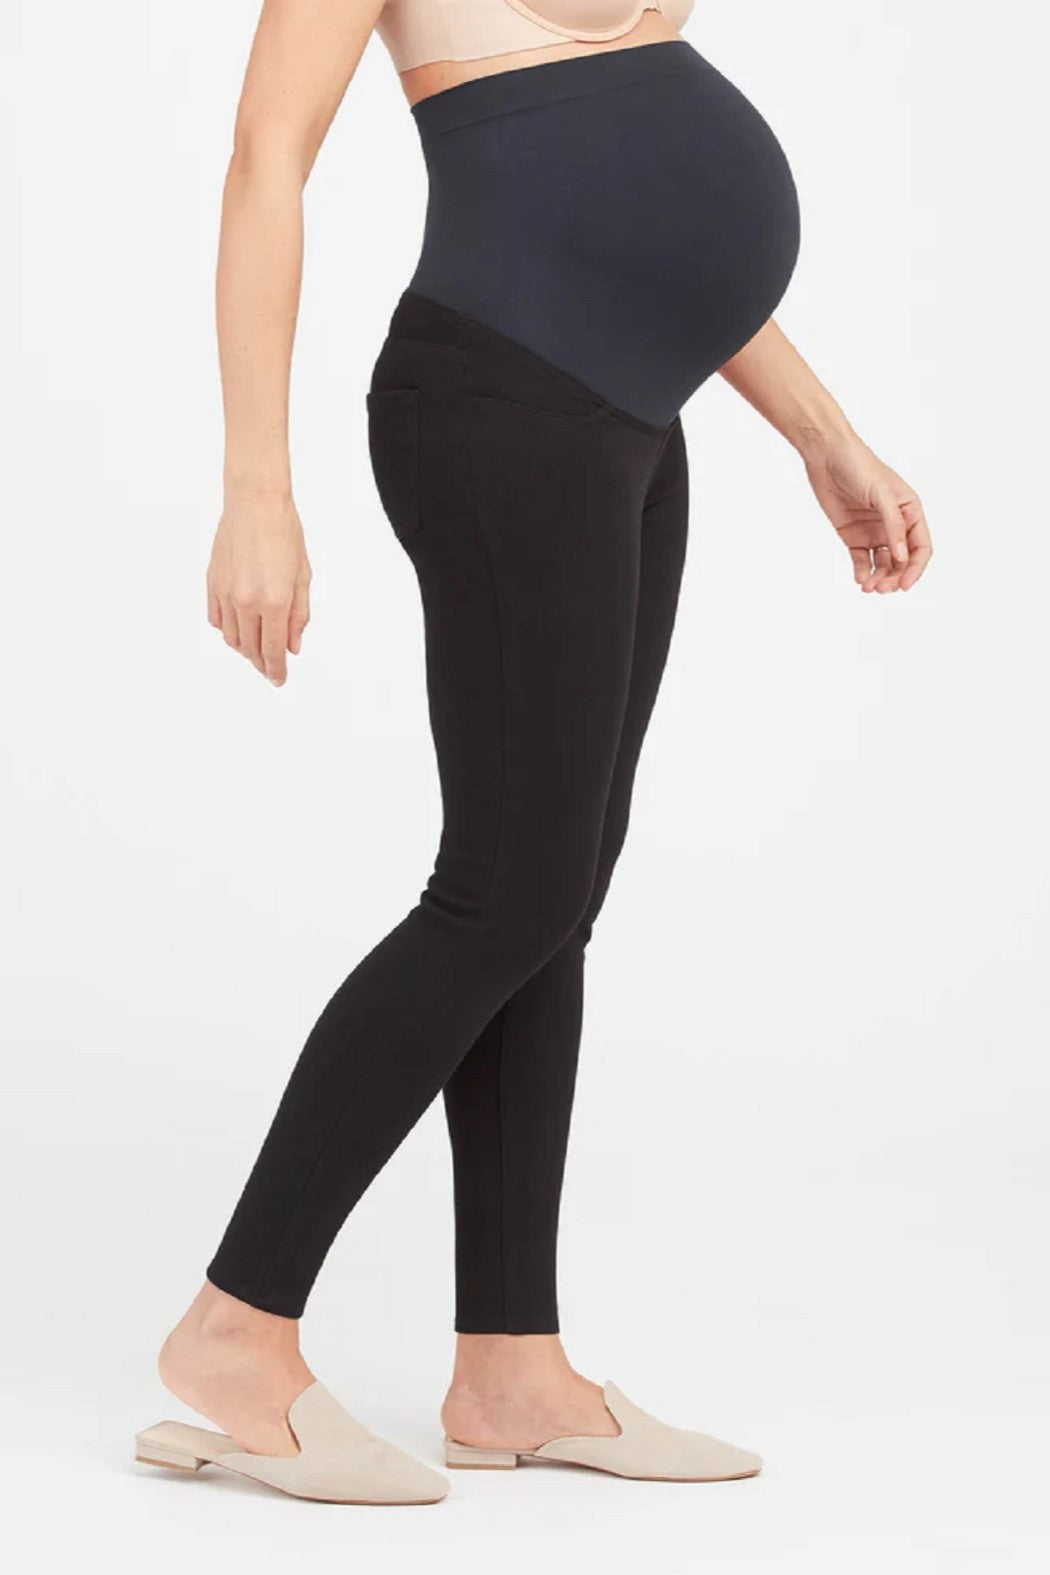 SPANX - Did you know the magic of SPANX is now in activewear?! NEW